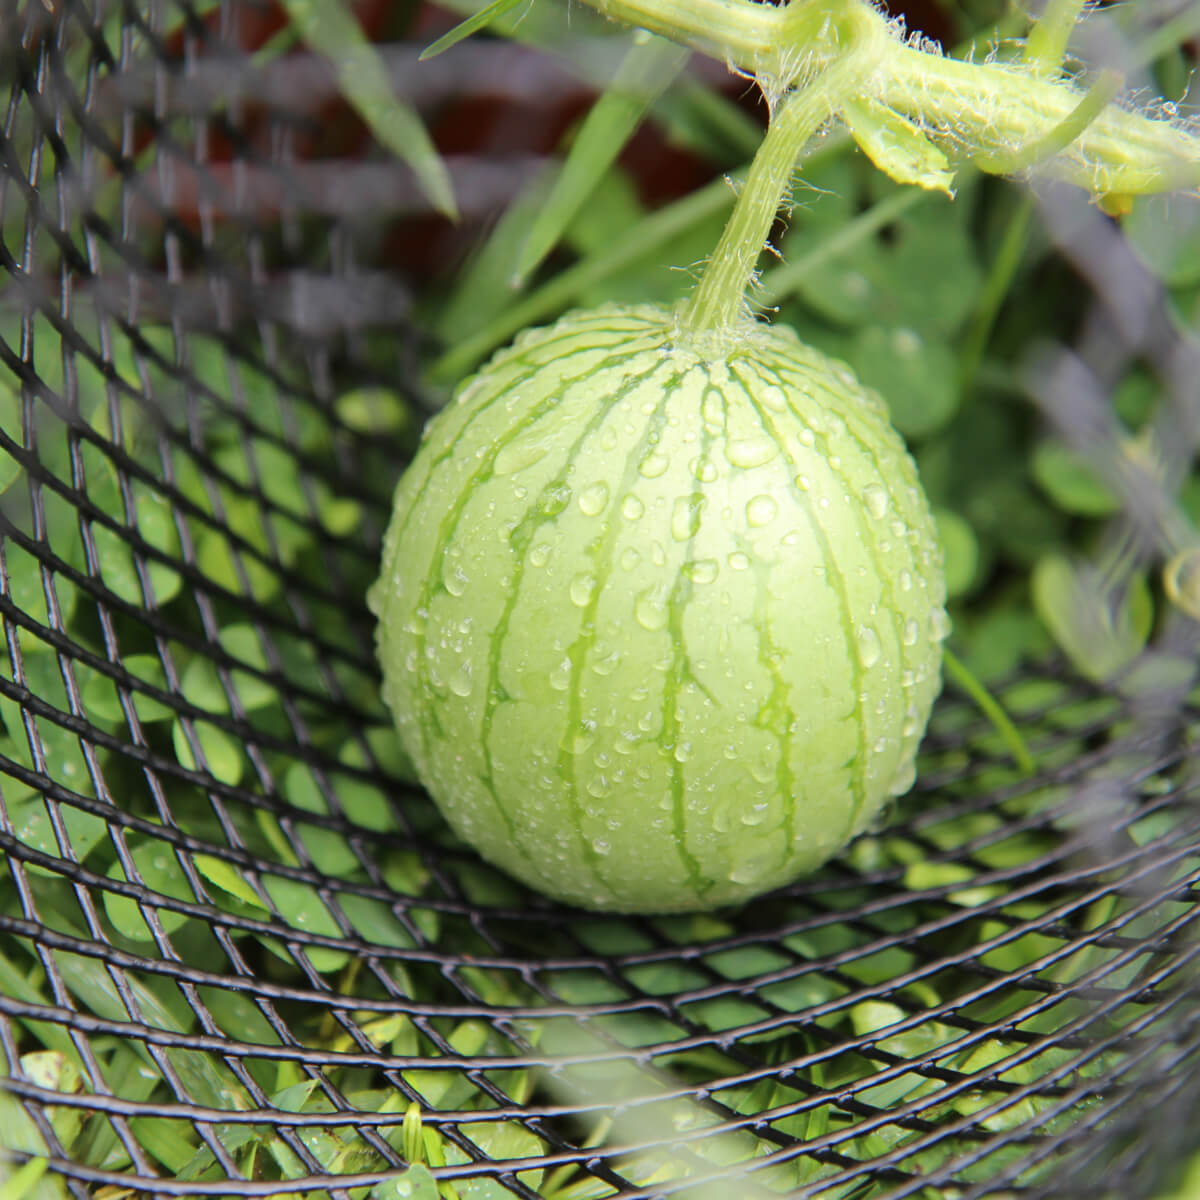 How to Grow Watermelon from Seed Indoors